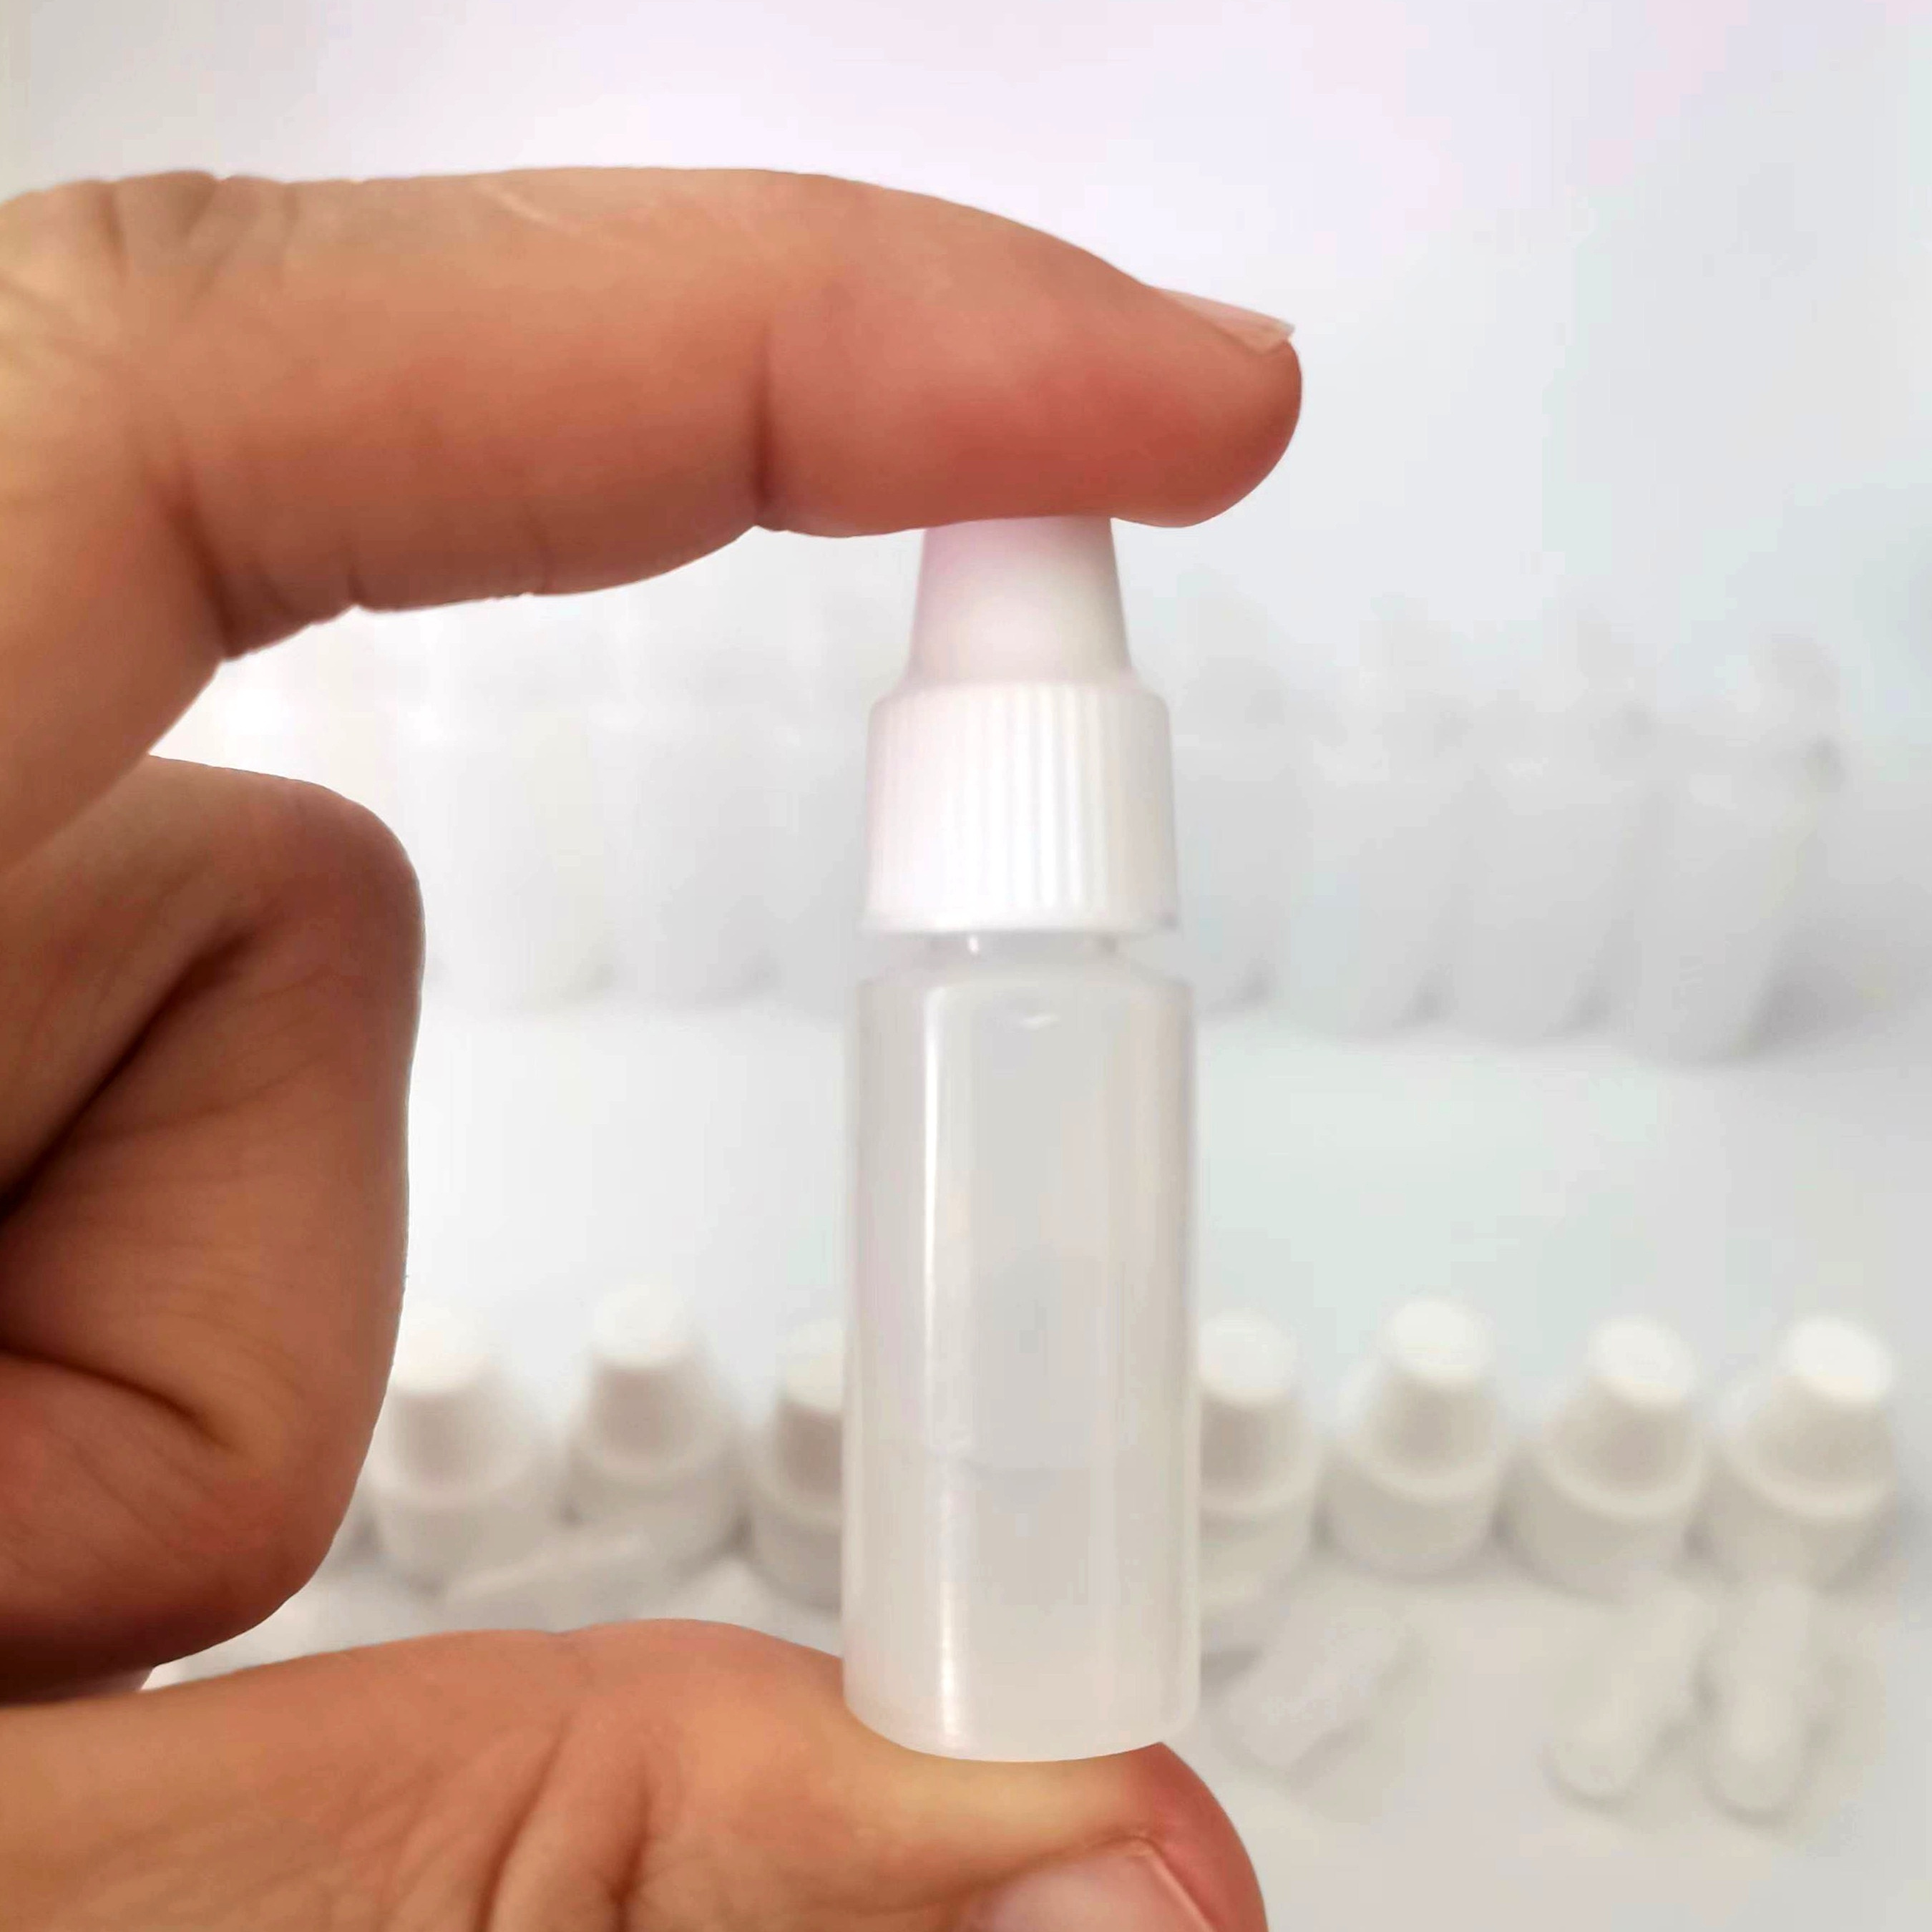 

50pcs 3ml Plastic Pe Squeeze Bottle, 3ml Clear Plastic Empty Squeezable Dropper Bottles Portable Eye Liquid Dropper Small Plastic Travel Bottle Refillable Containers With Screw And Plug (50pcs, 3ml)